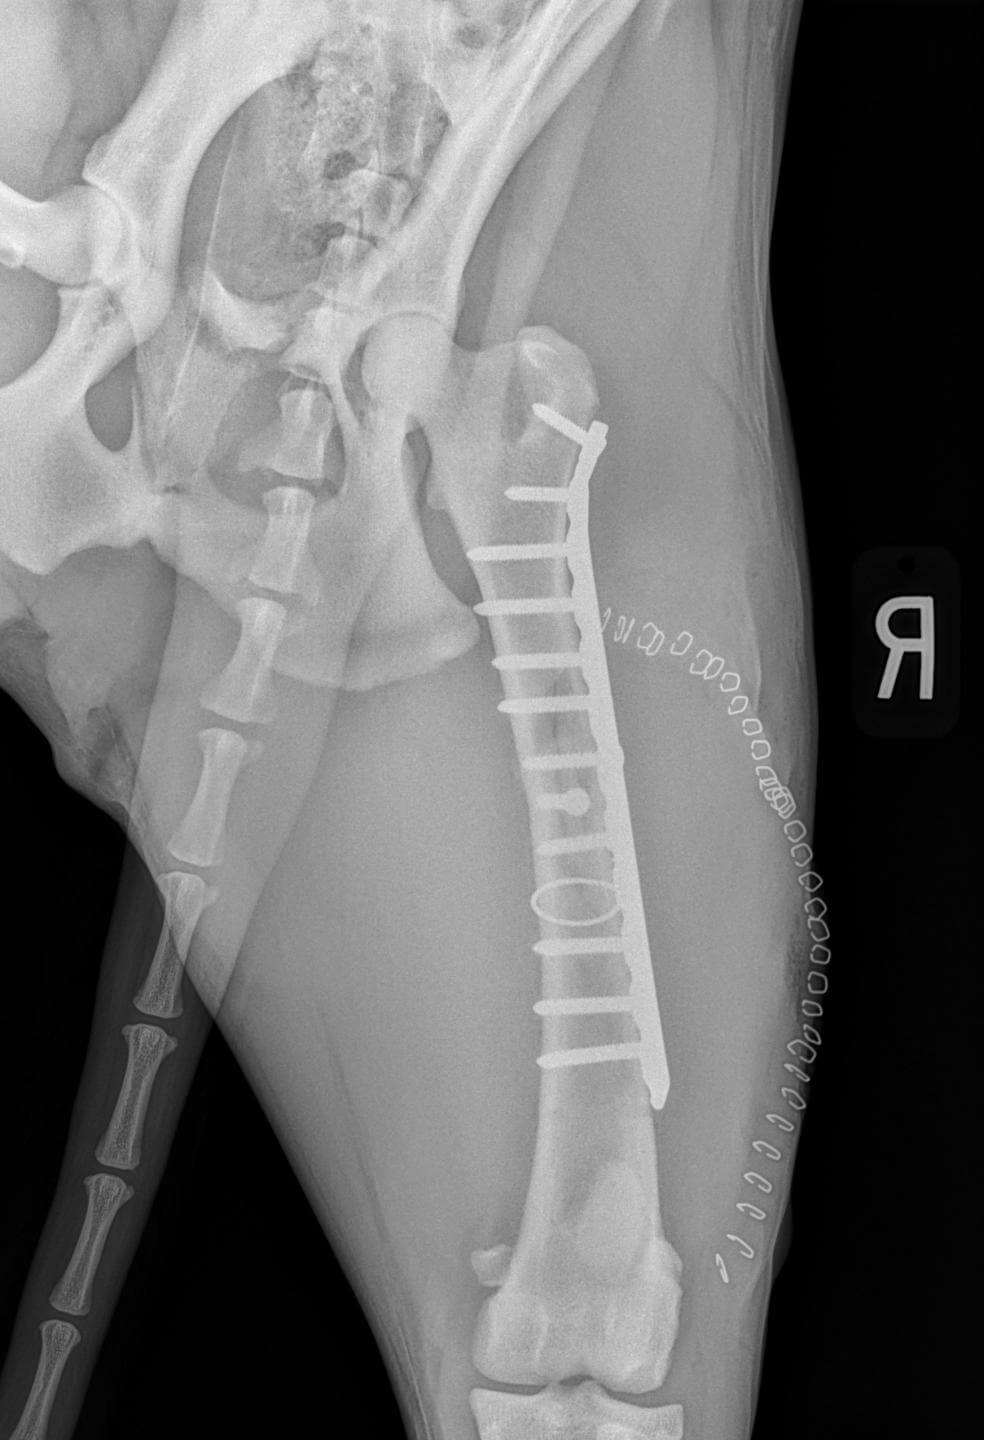 Canine plate butterfly fracture repair